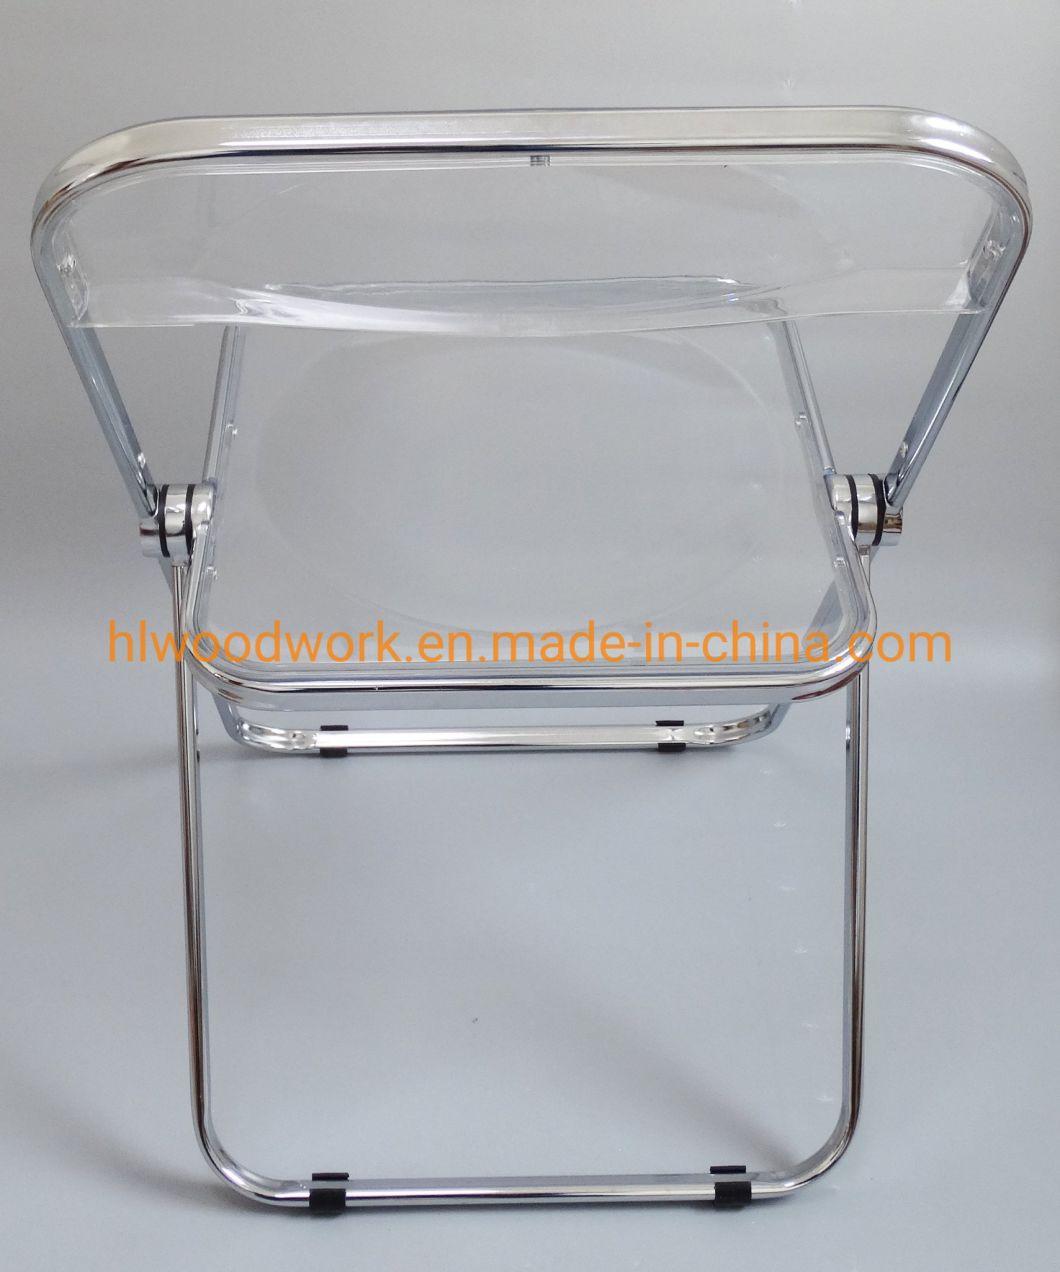 Modern Transparent Orange Folding Chair PC Plastic Outdoor Chair Chrome Frame Office Bar Dining Leisure Banquet Wedding Meeting Chair Plastic Dining Chair